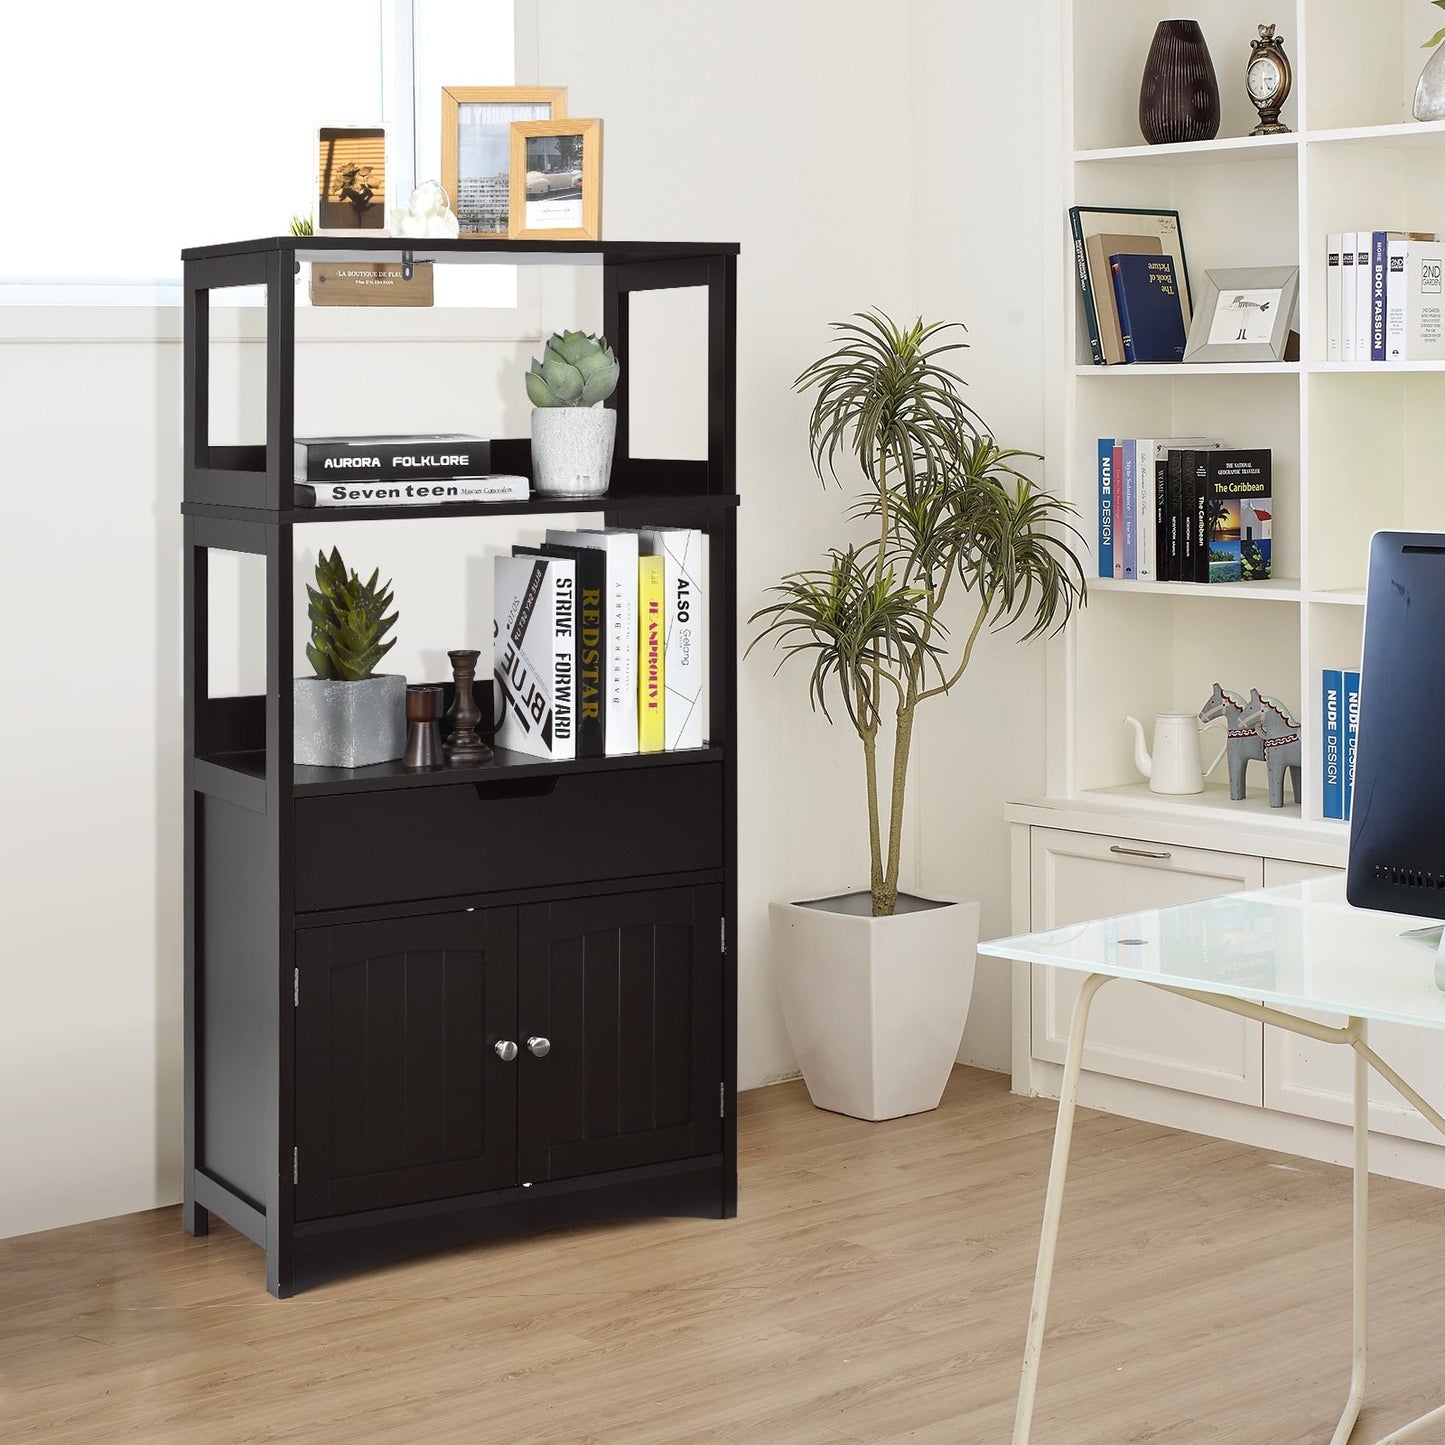 Bathroom Storage Cabinet with Drawer and Shelf Floor Cabinet, Black - Gallery Canada